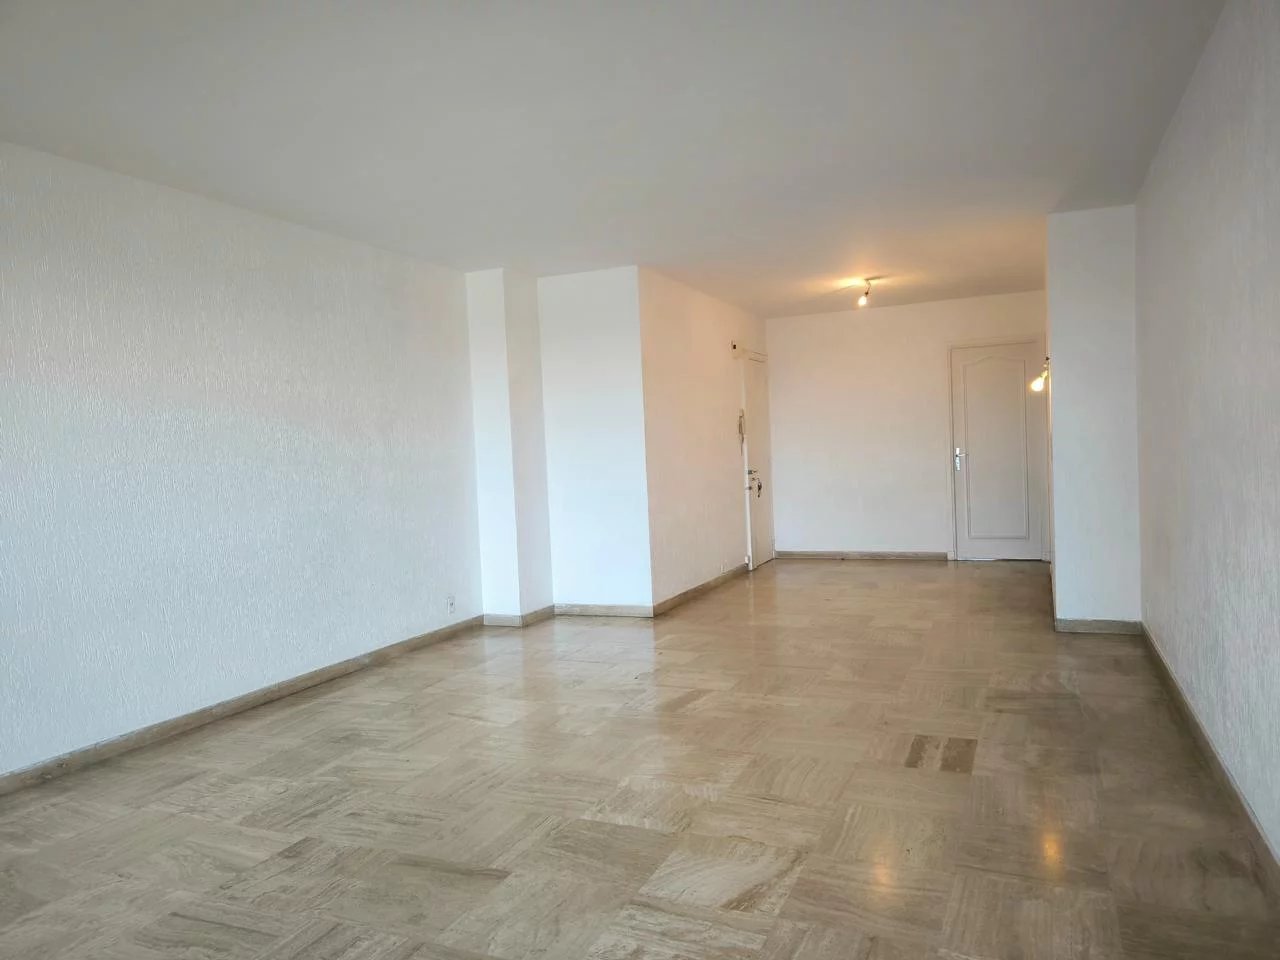 Appartement  3 Rooms 97m2  for sale   840 600 €